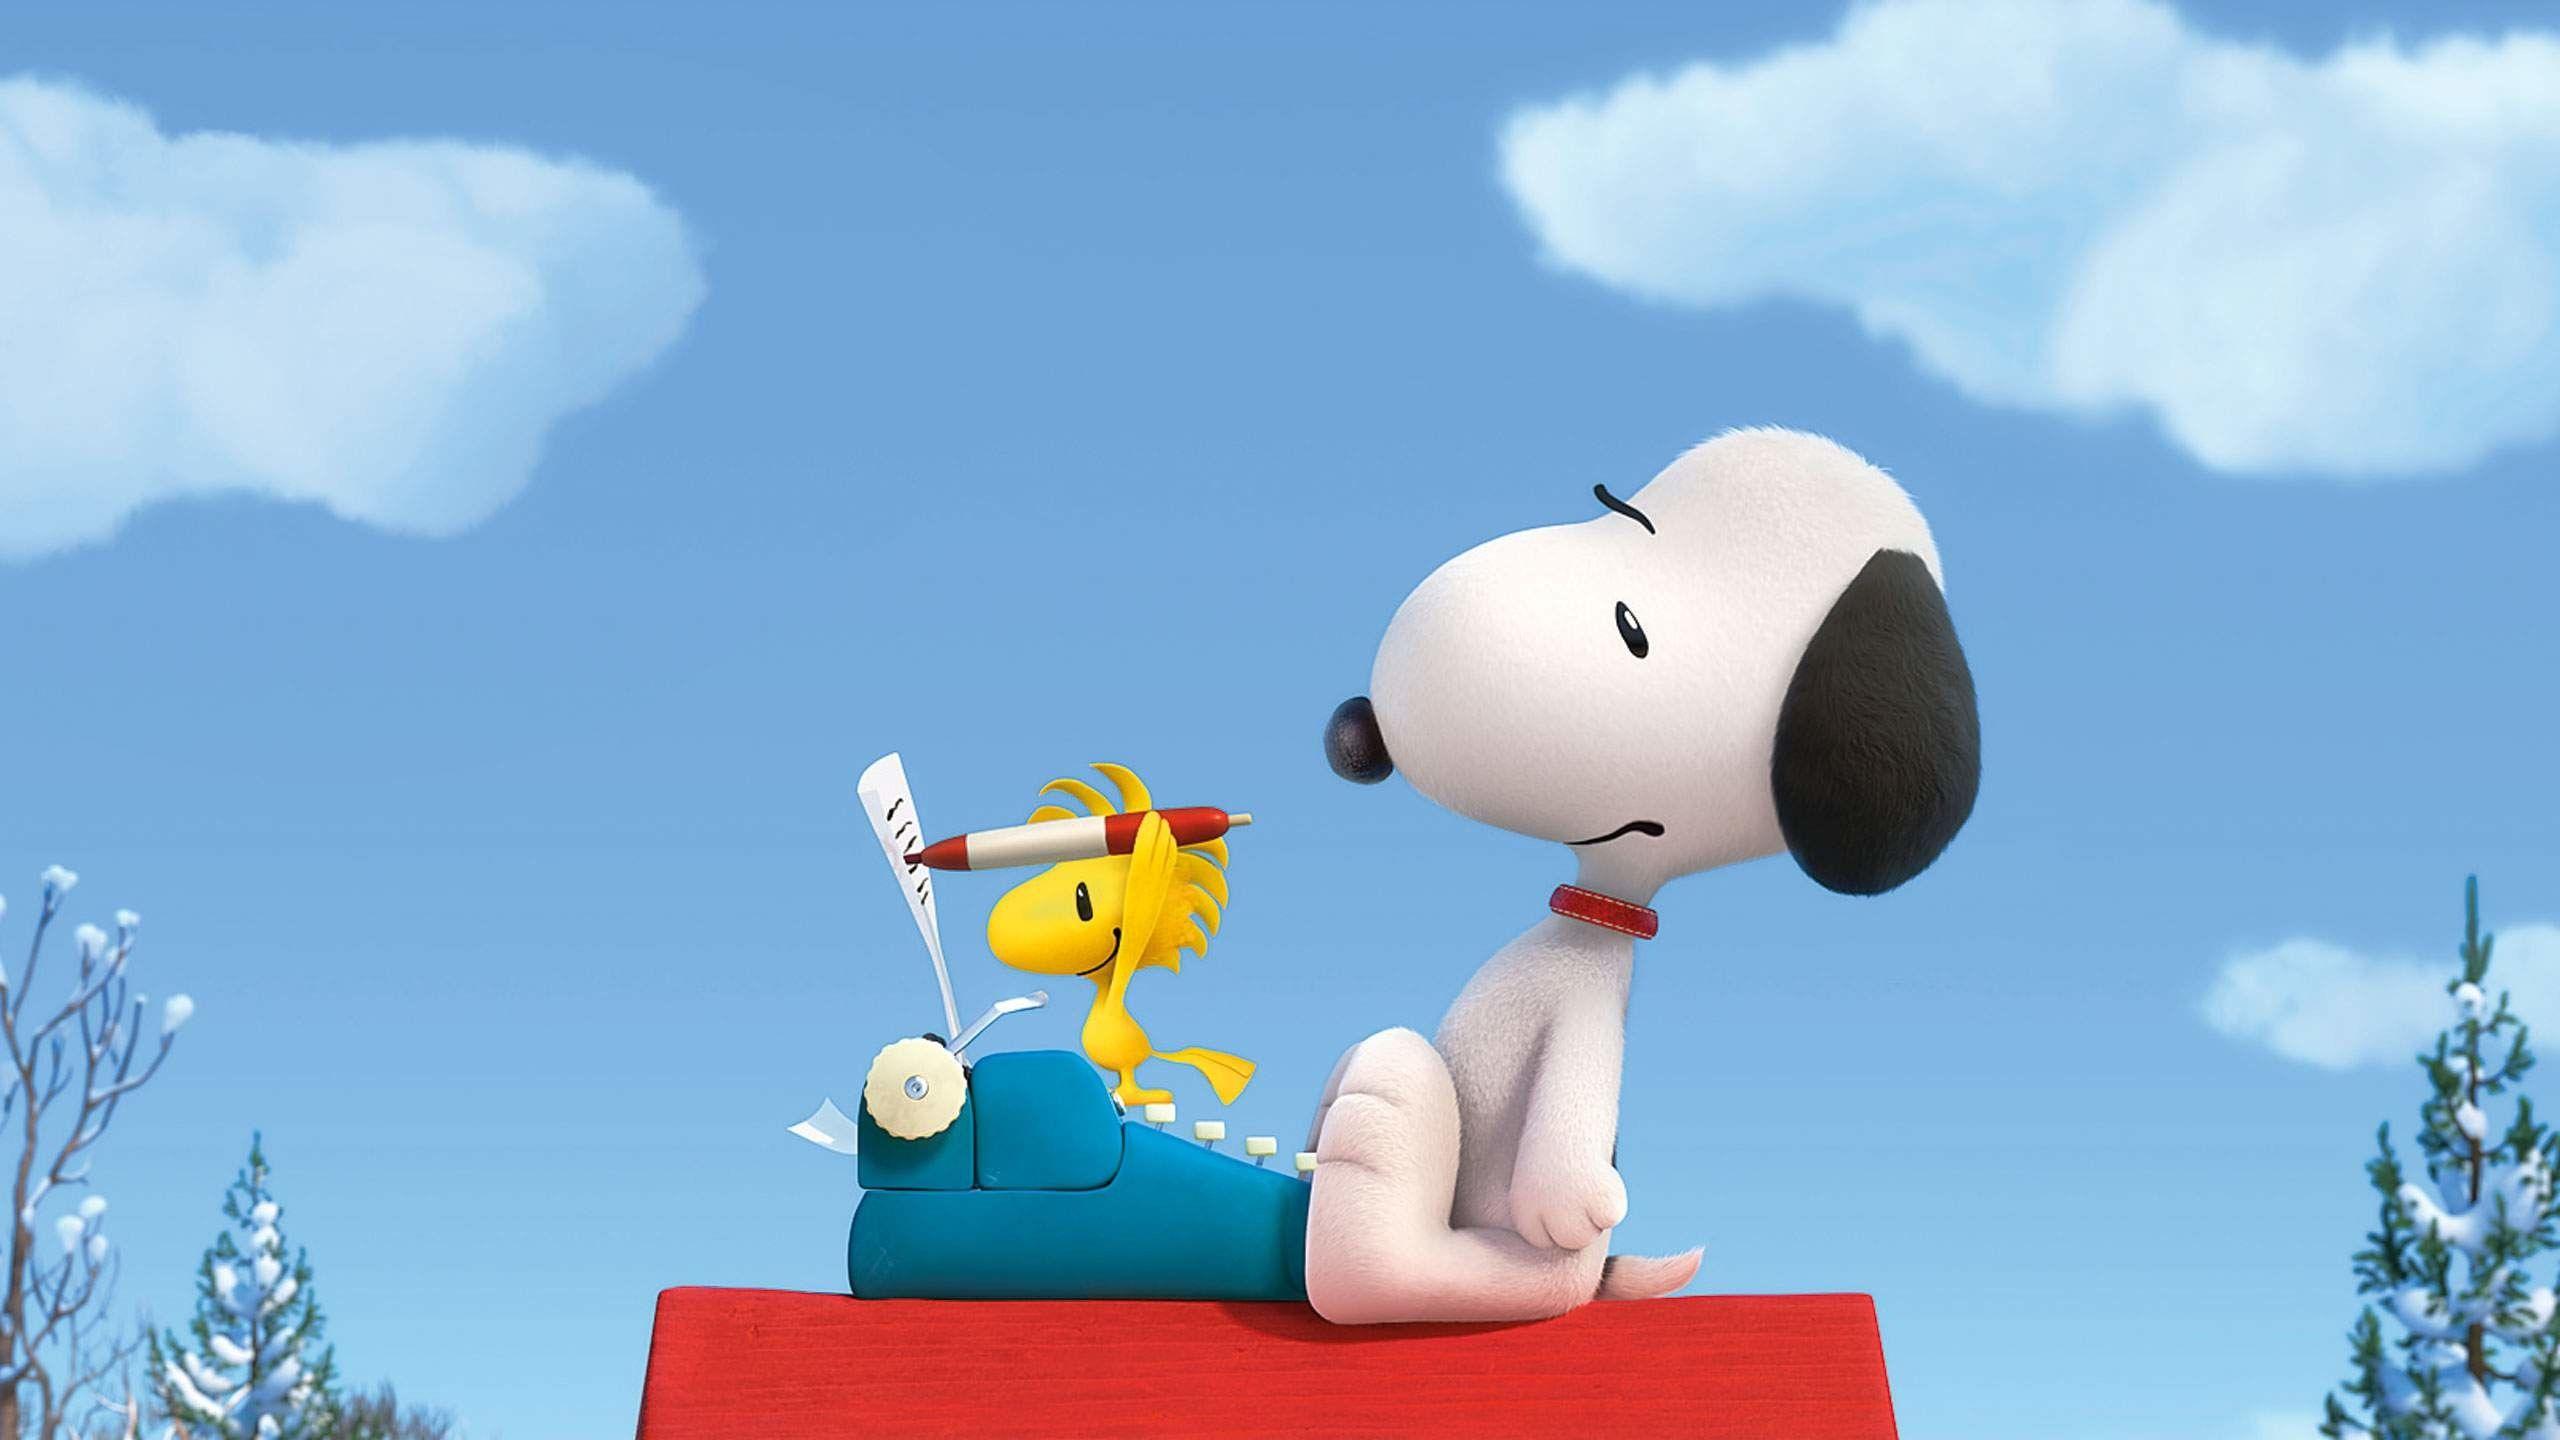 50 Snoopy HD Wallpapers and Backgrounds